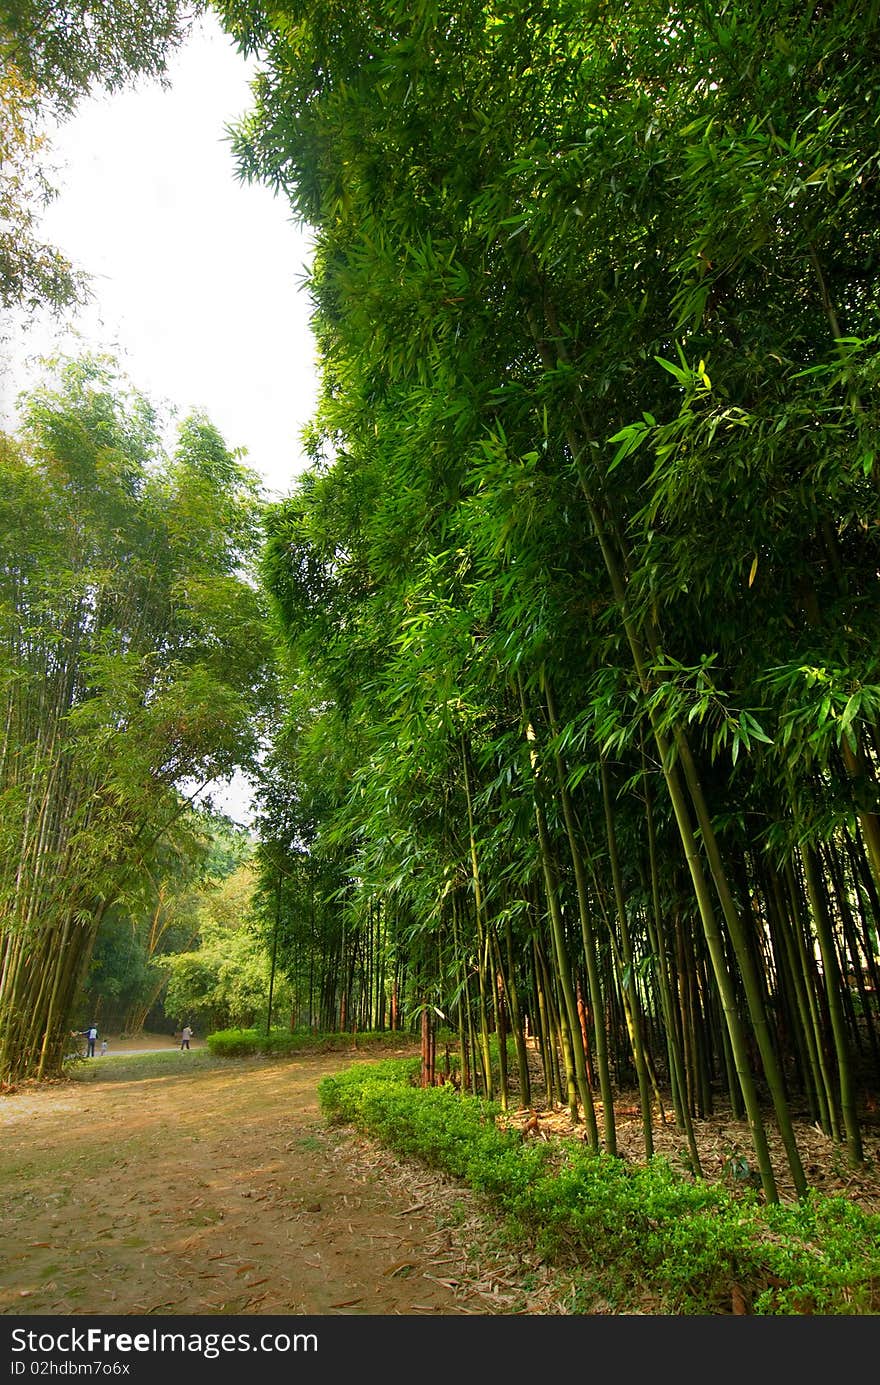 Lush green bamboo forest in spring. Lush green bamboo forest in spring